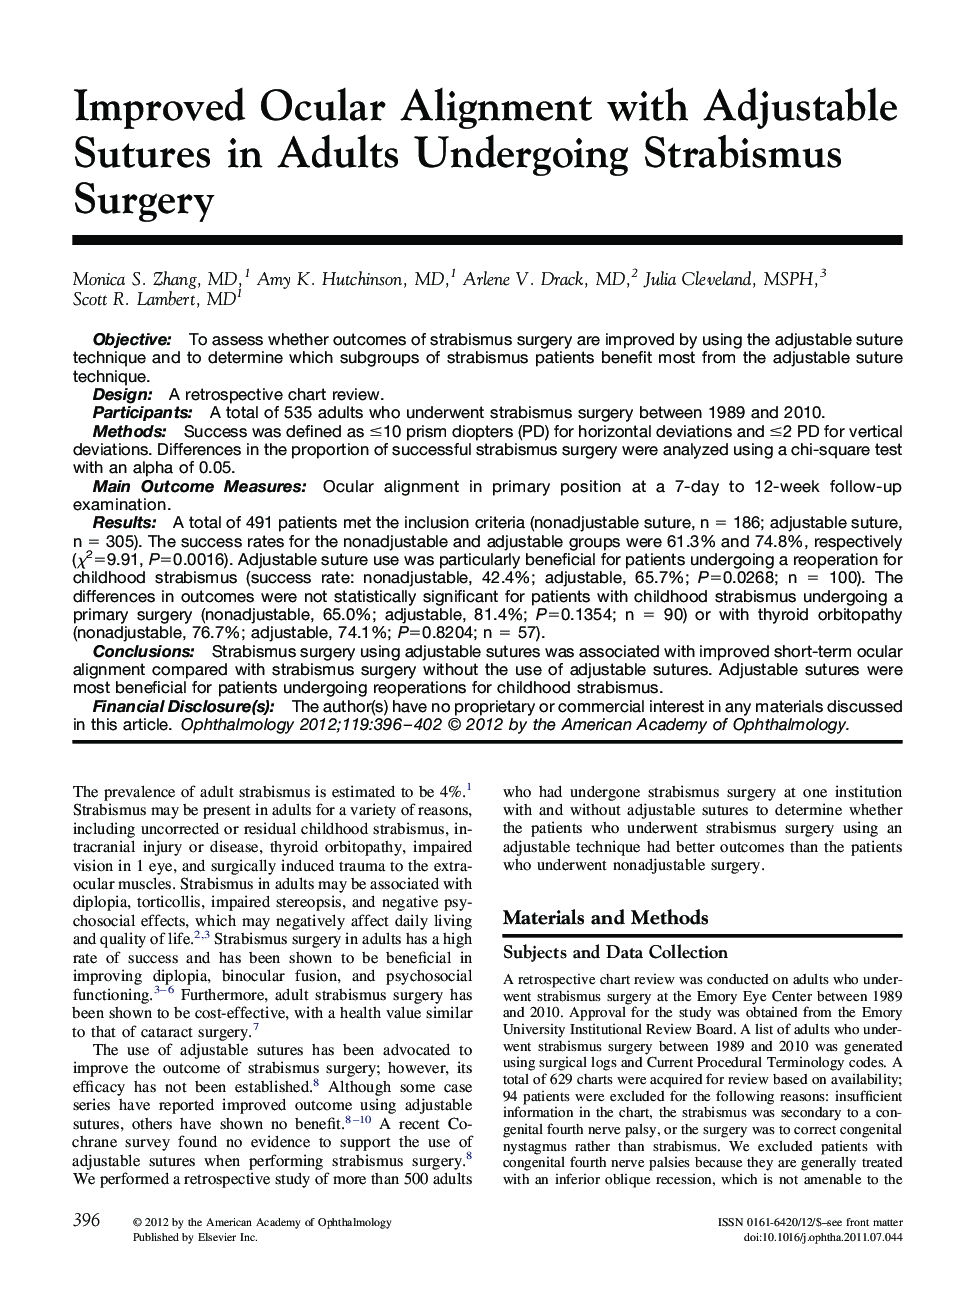 Improved Ocular Alignment with Adjustable Sutures in Adults Undergoing Strabismus Surgery 